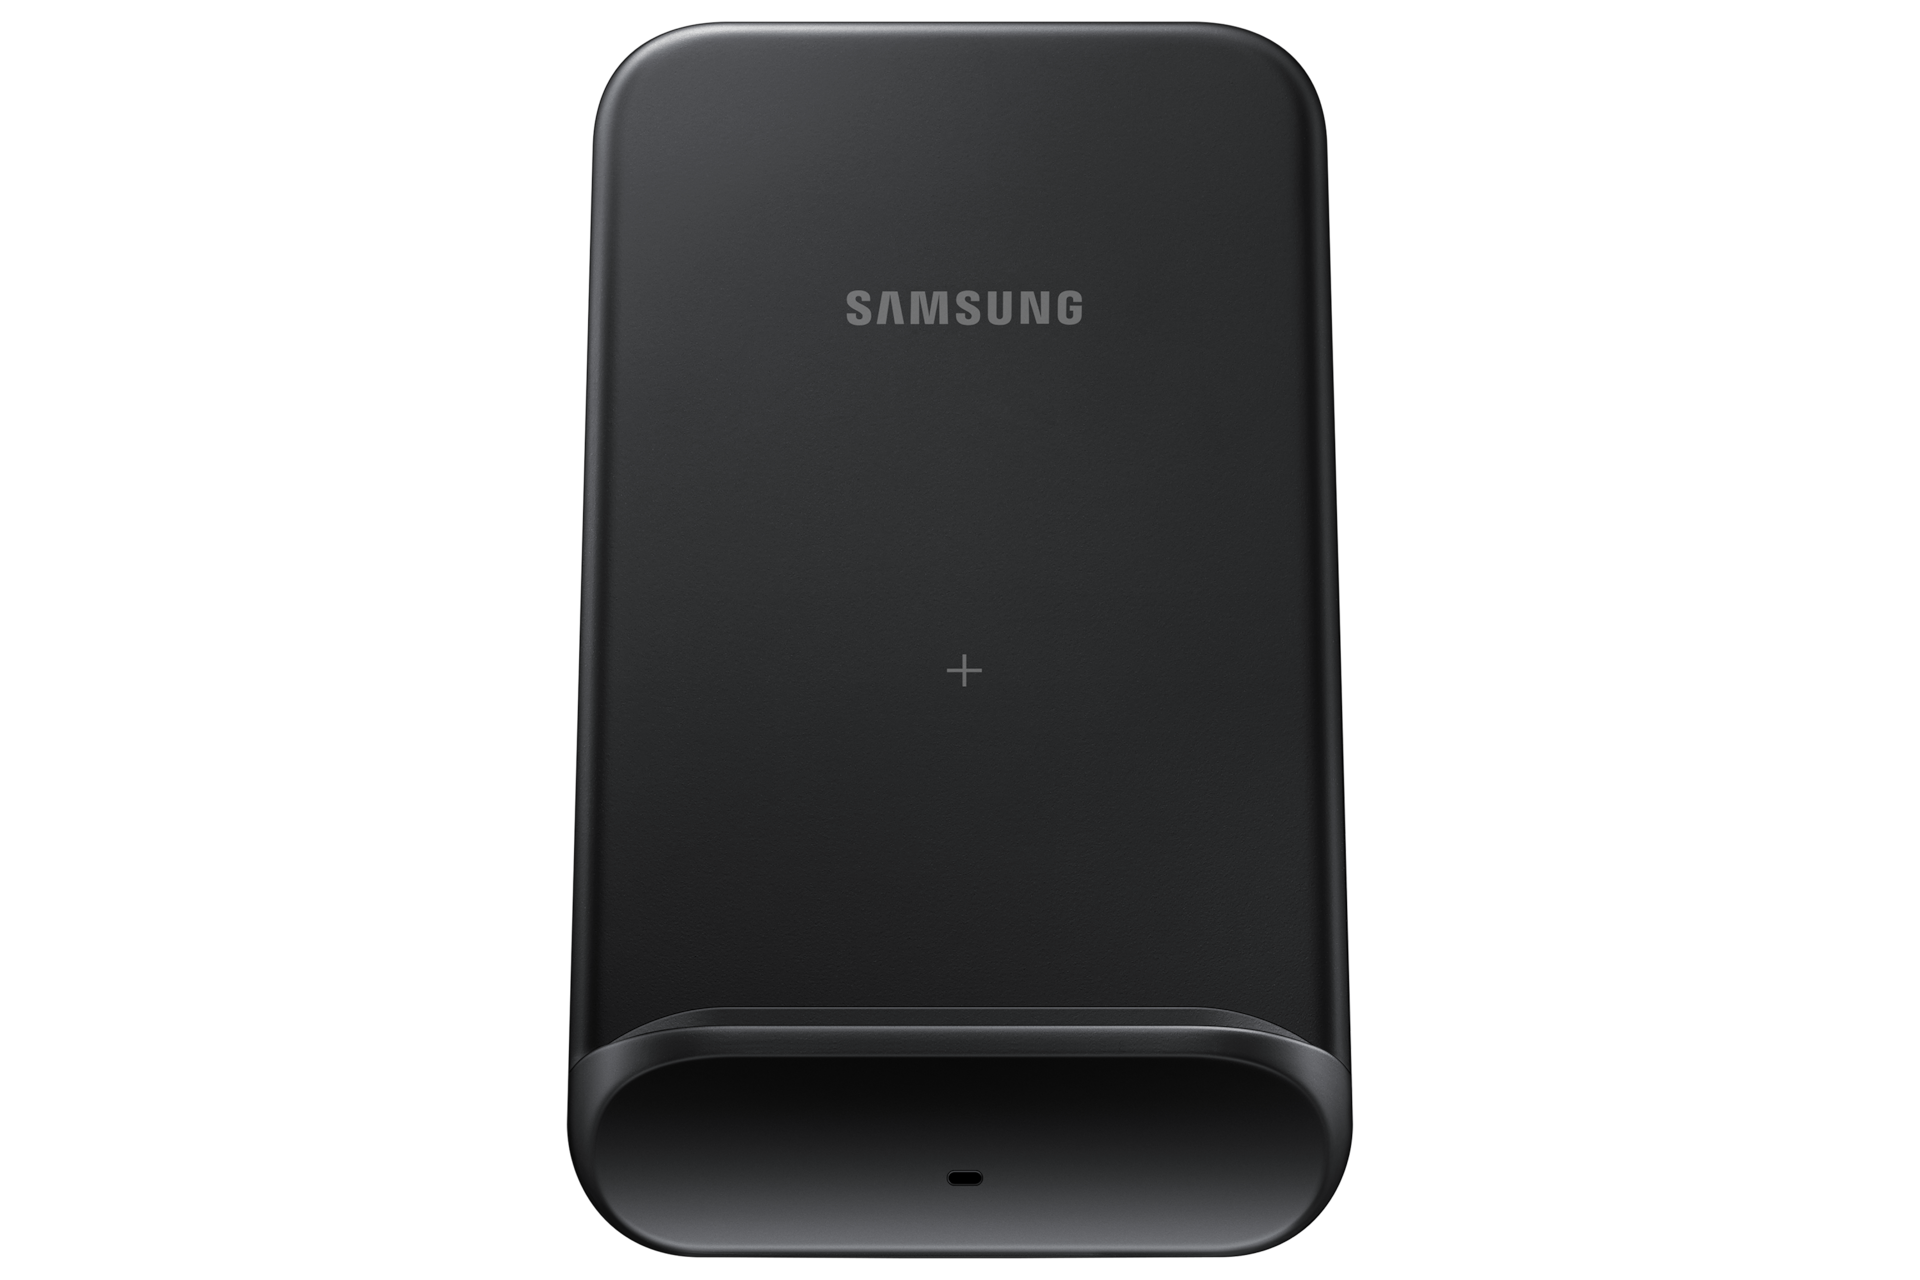 https://images.samsung.com/is/image/samsung/ie-wireless-charger-convertible-ep-n3300-ep-n3300tbeggb-frontblack-278254430?$650_519_PNG$